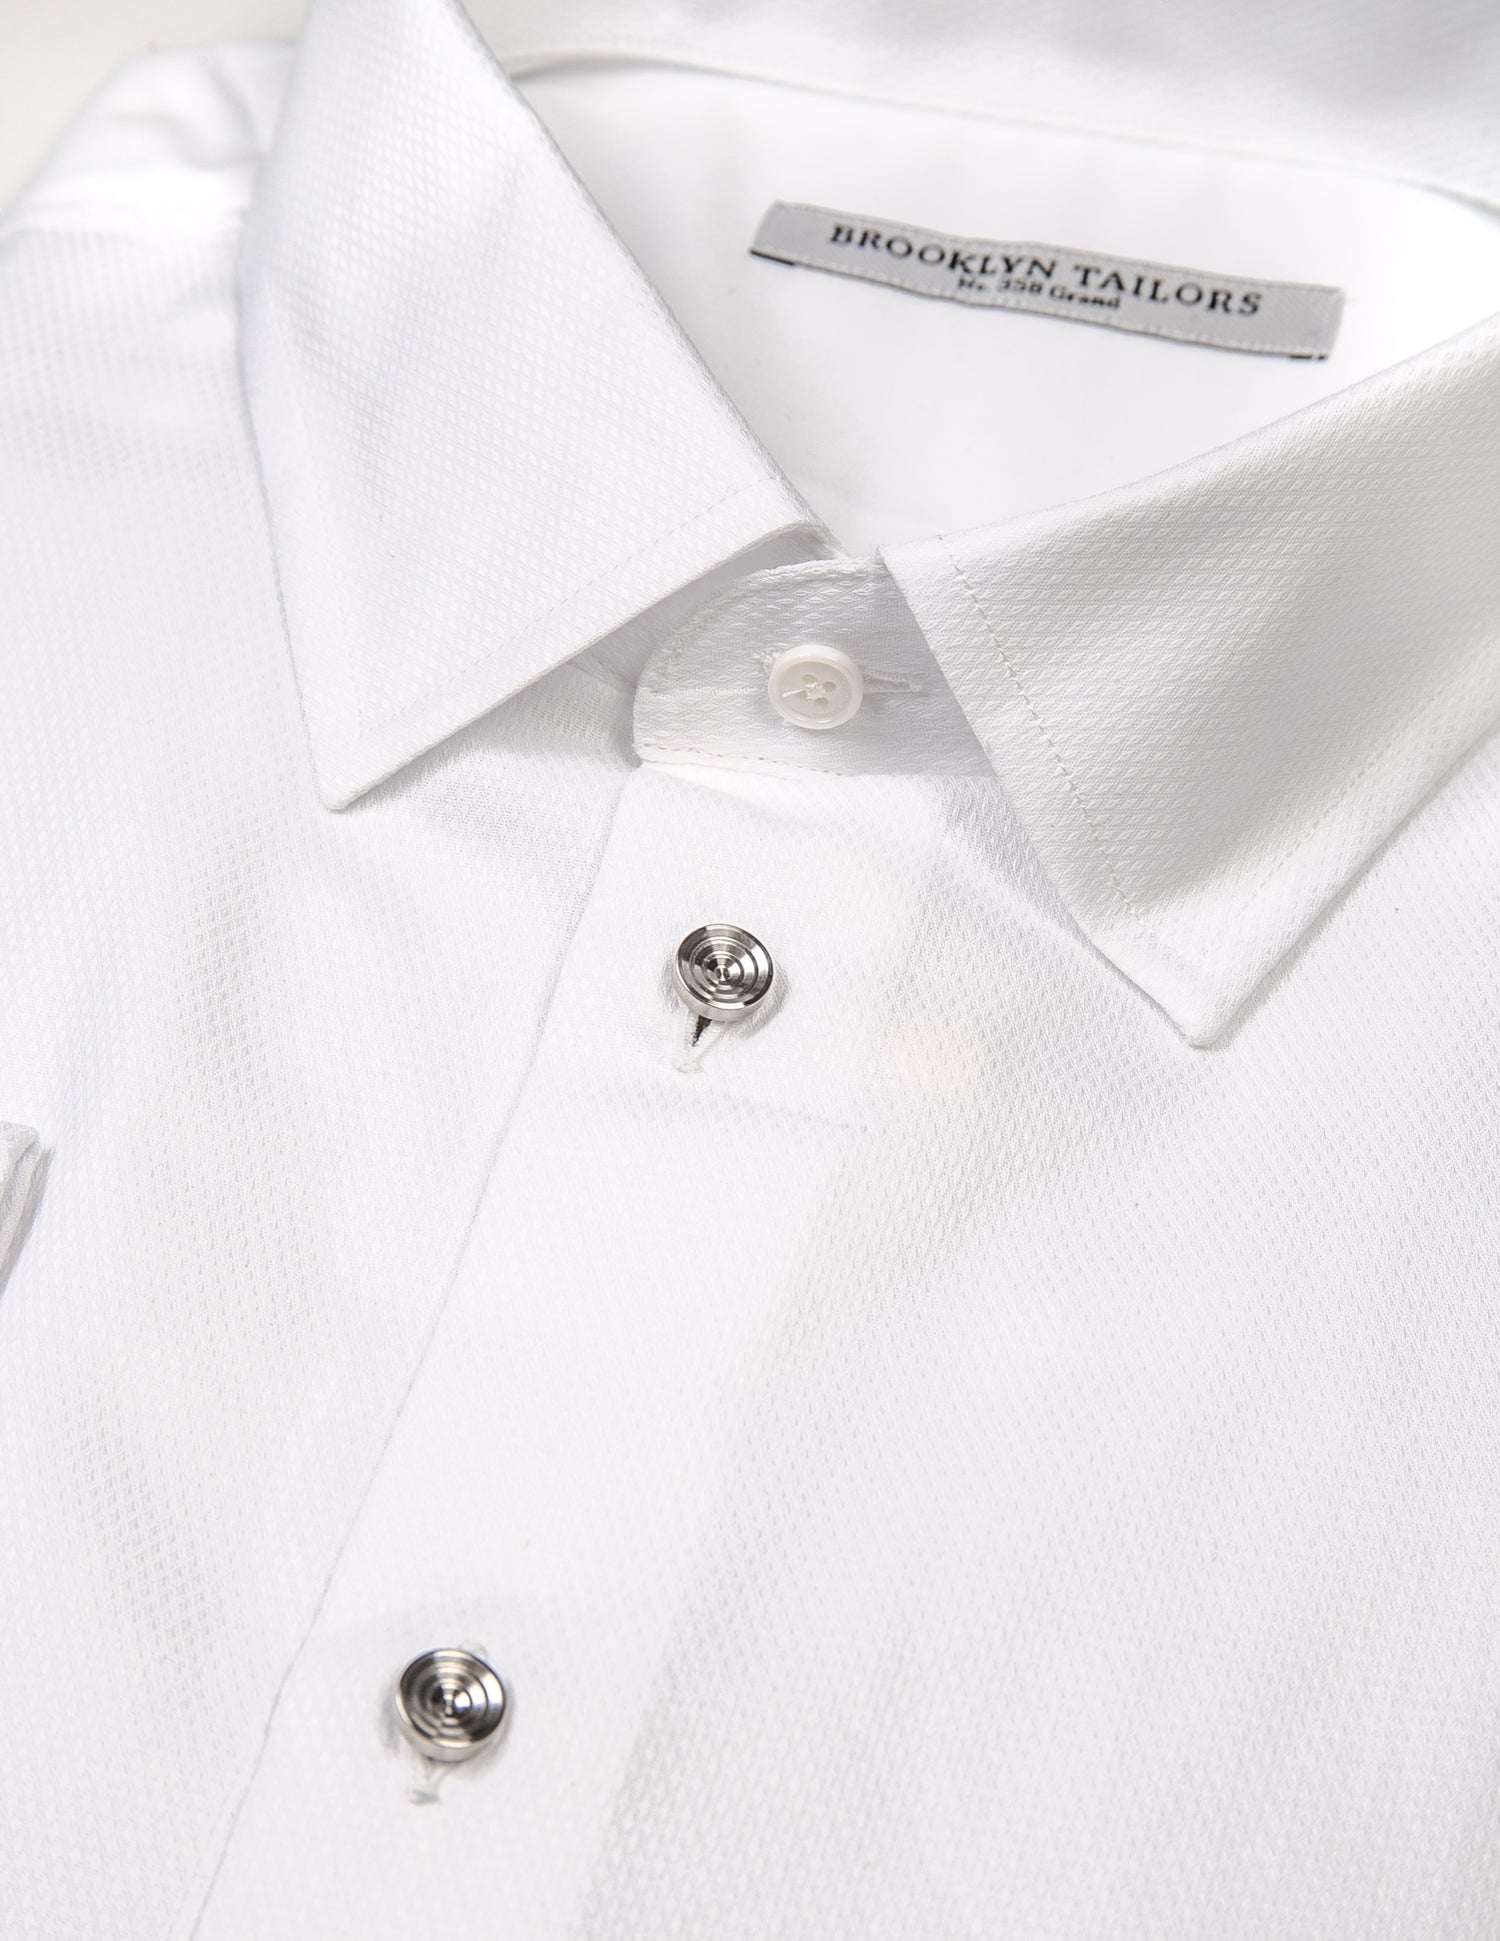 Detail showing Brooklyn Tailors French Cuff Tuxedo Shirt With Removable Buttons - White Dobby with removable buttons out and shirt studs instead